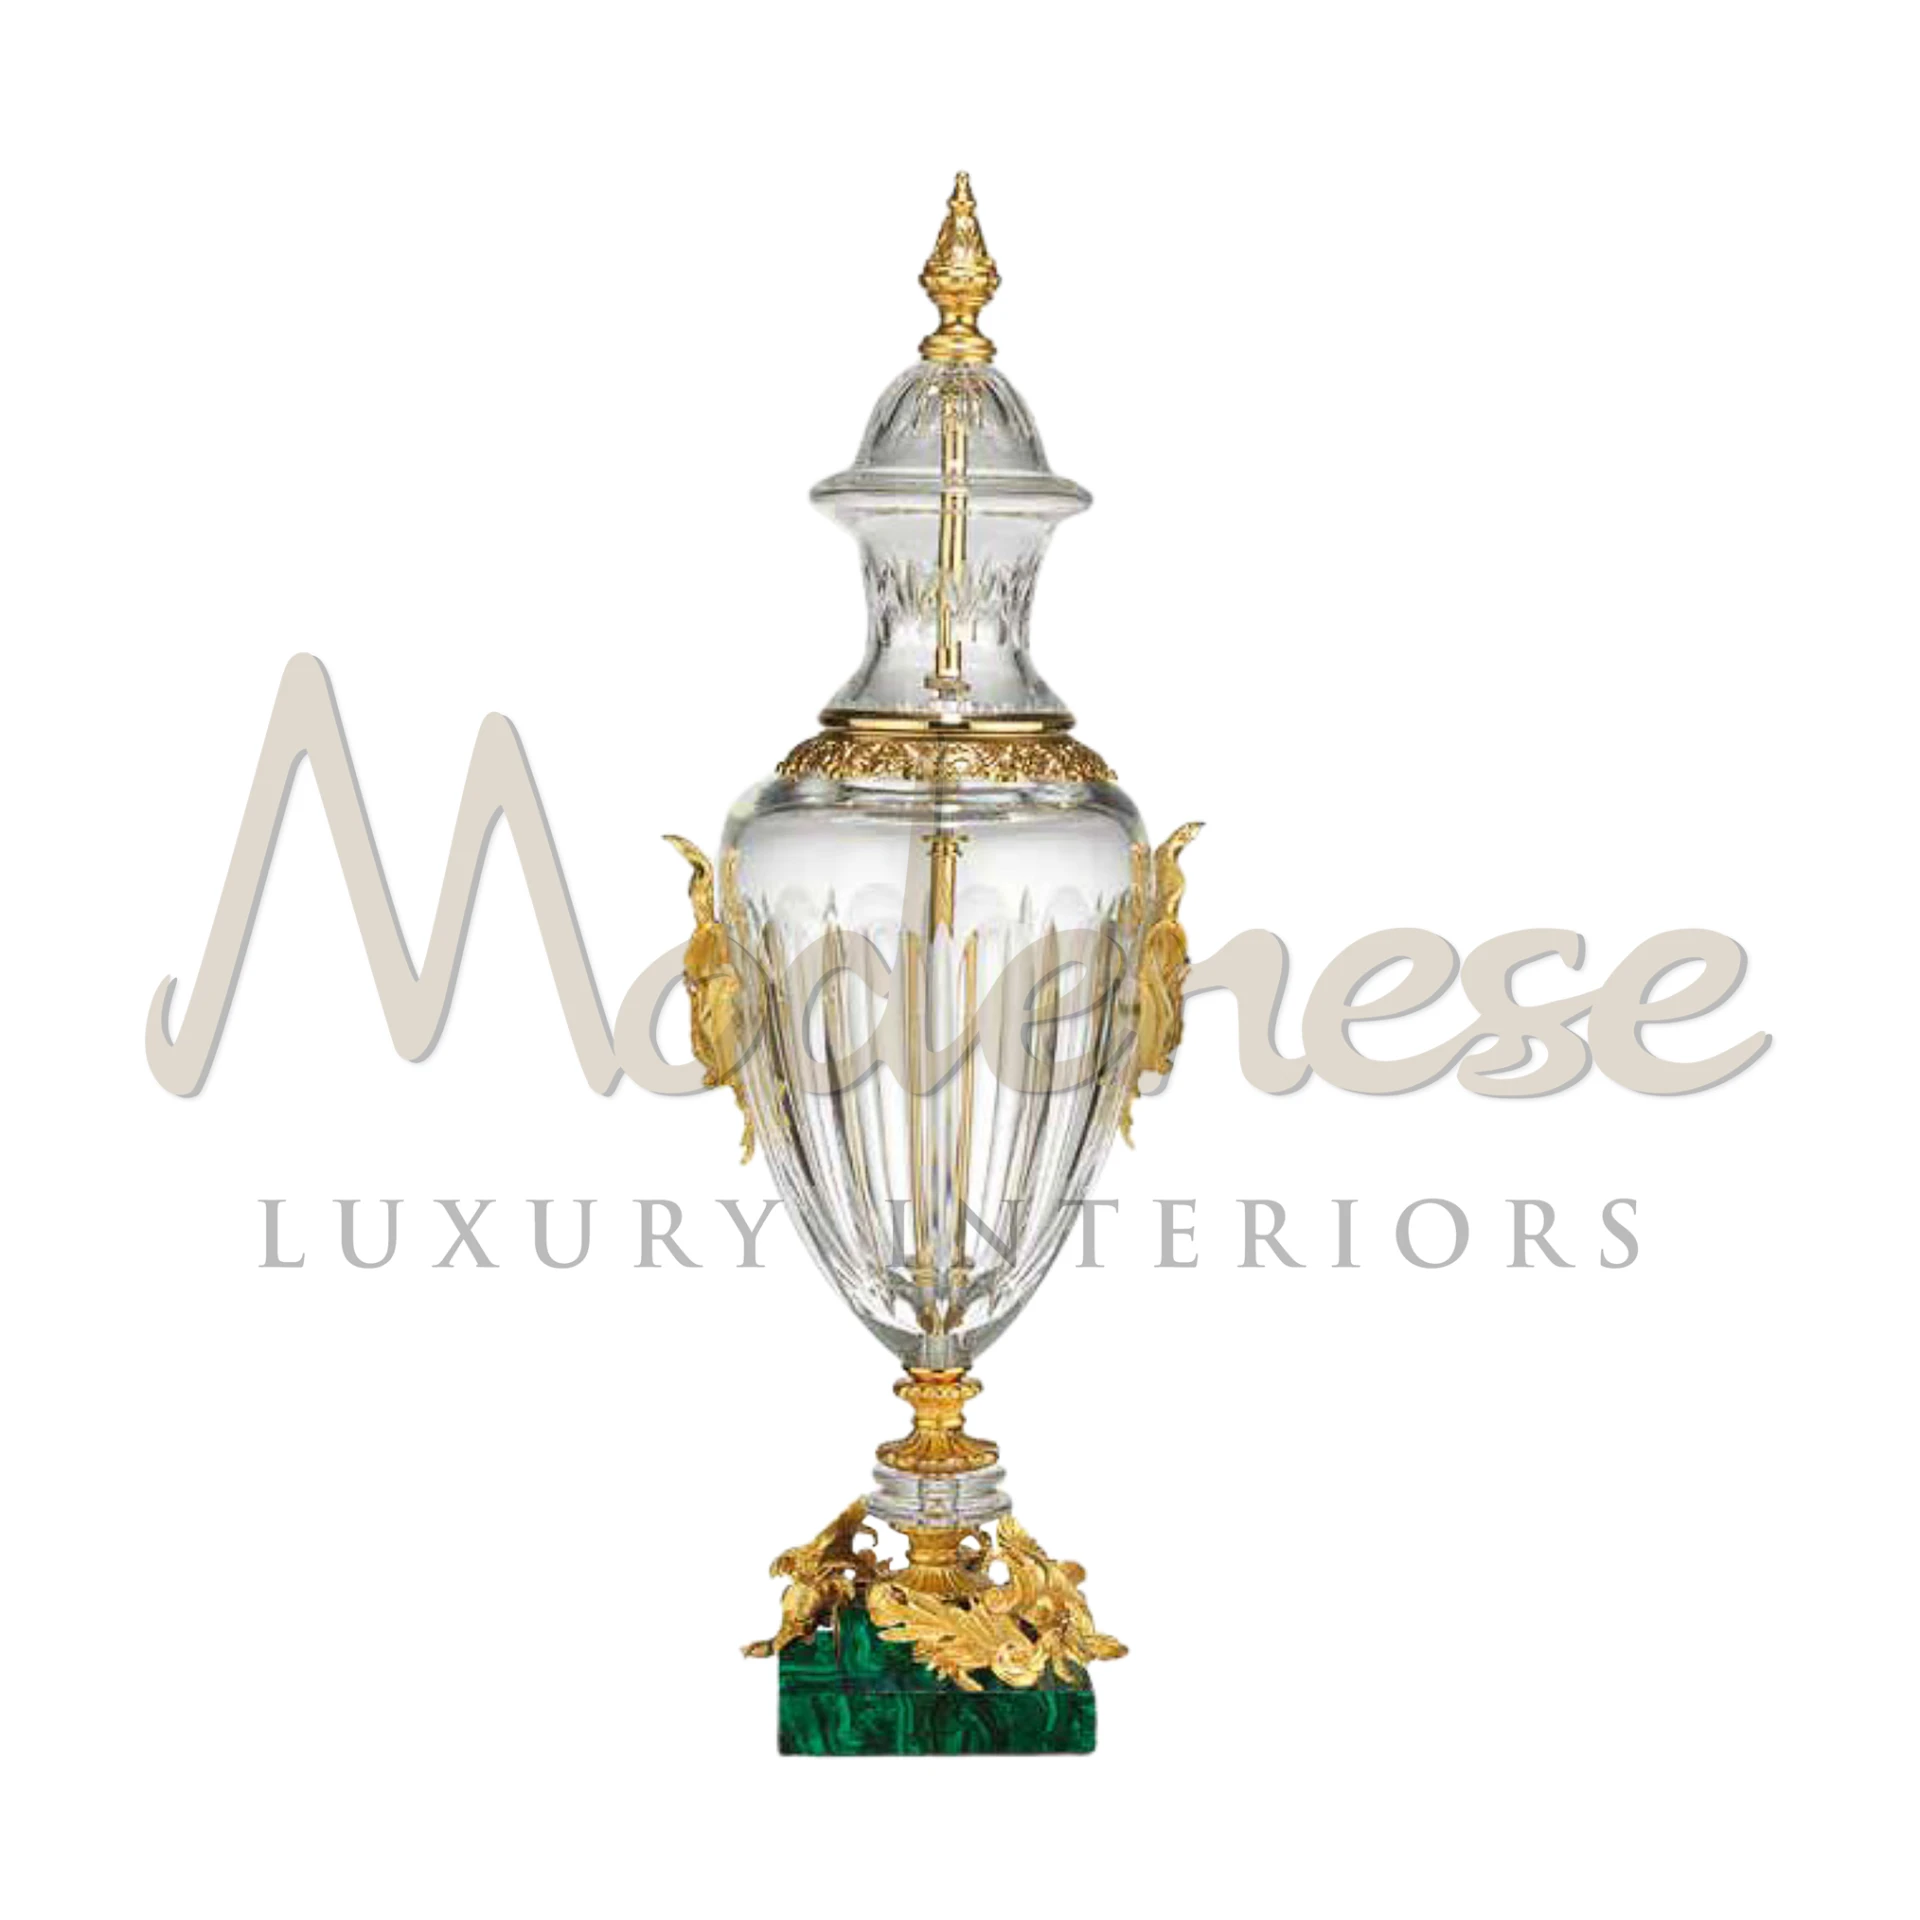 Refined Classical Crystal Vase, cherished by collectors, brings timeless elegance to luxury interiors with its classic beauty.






